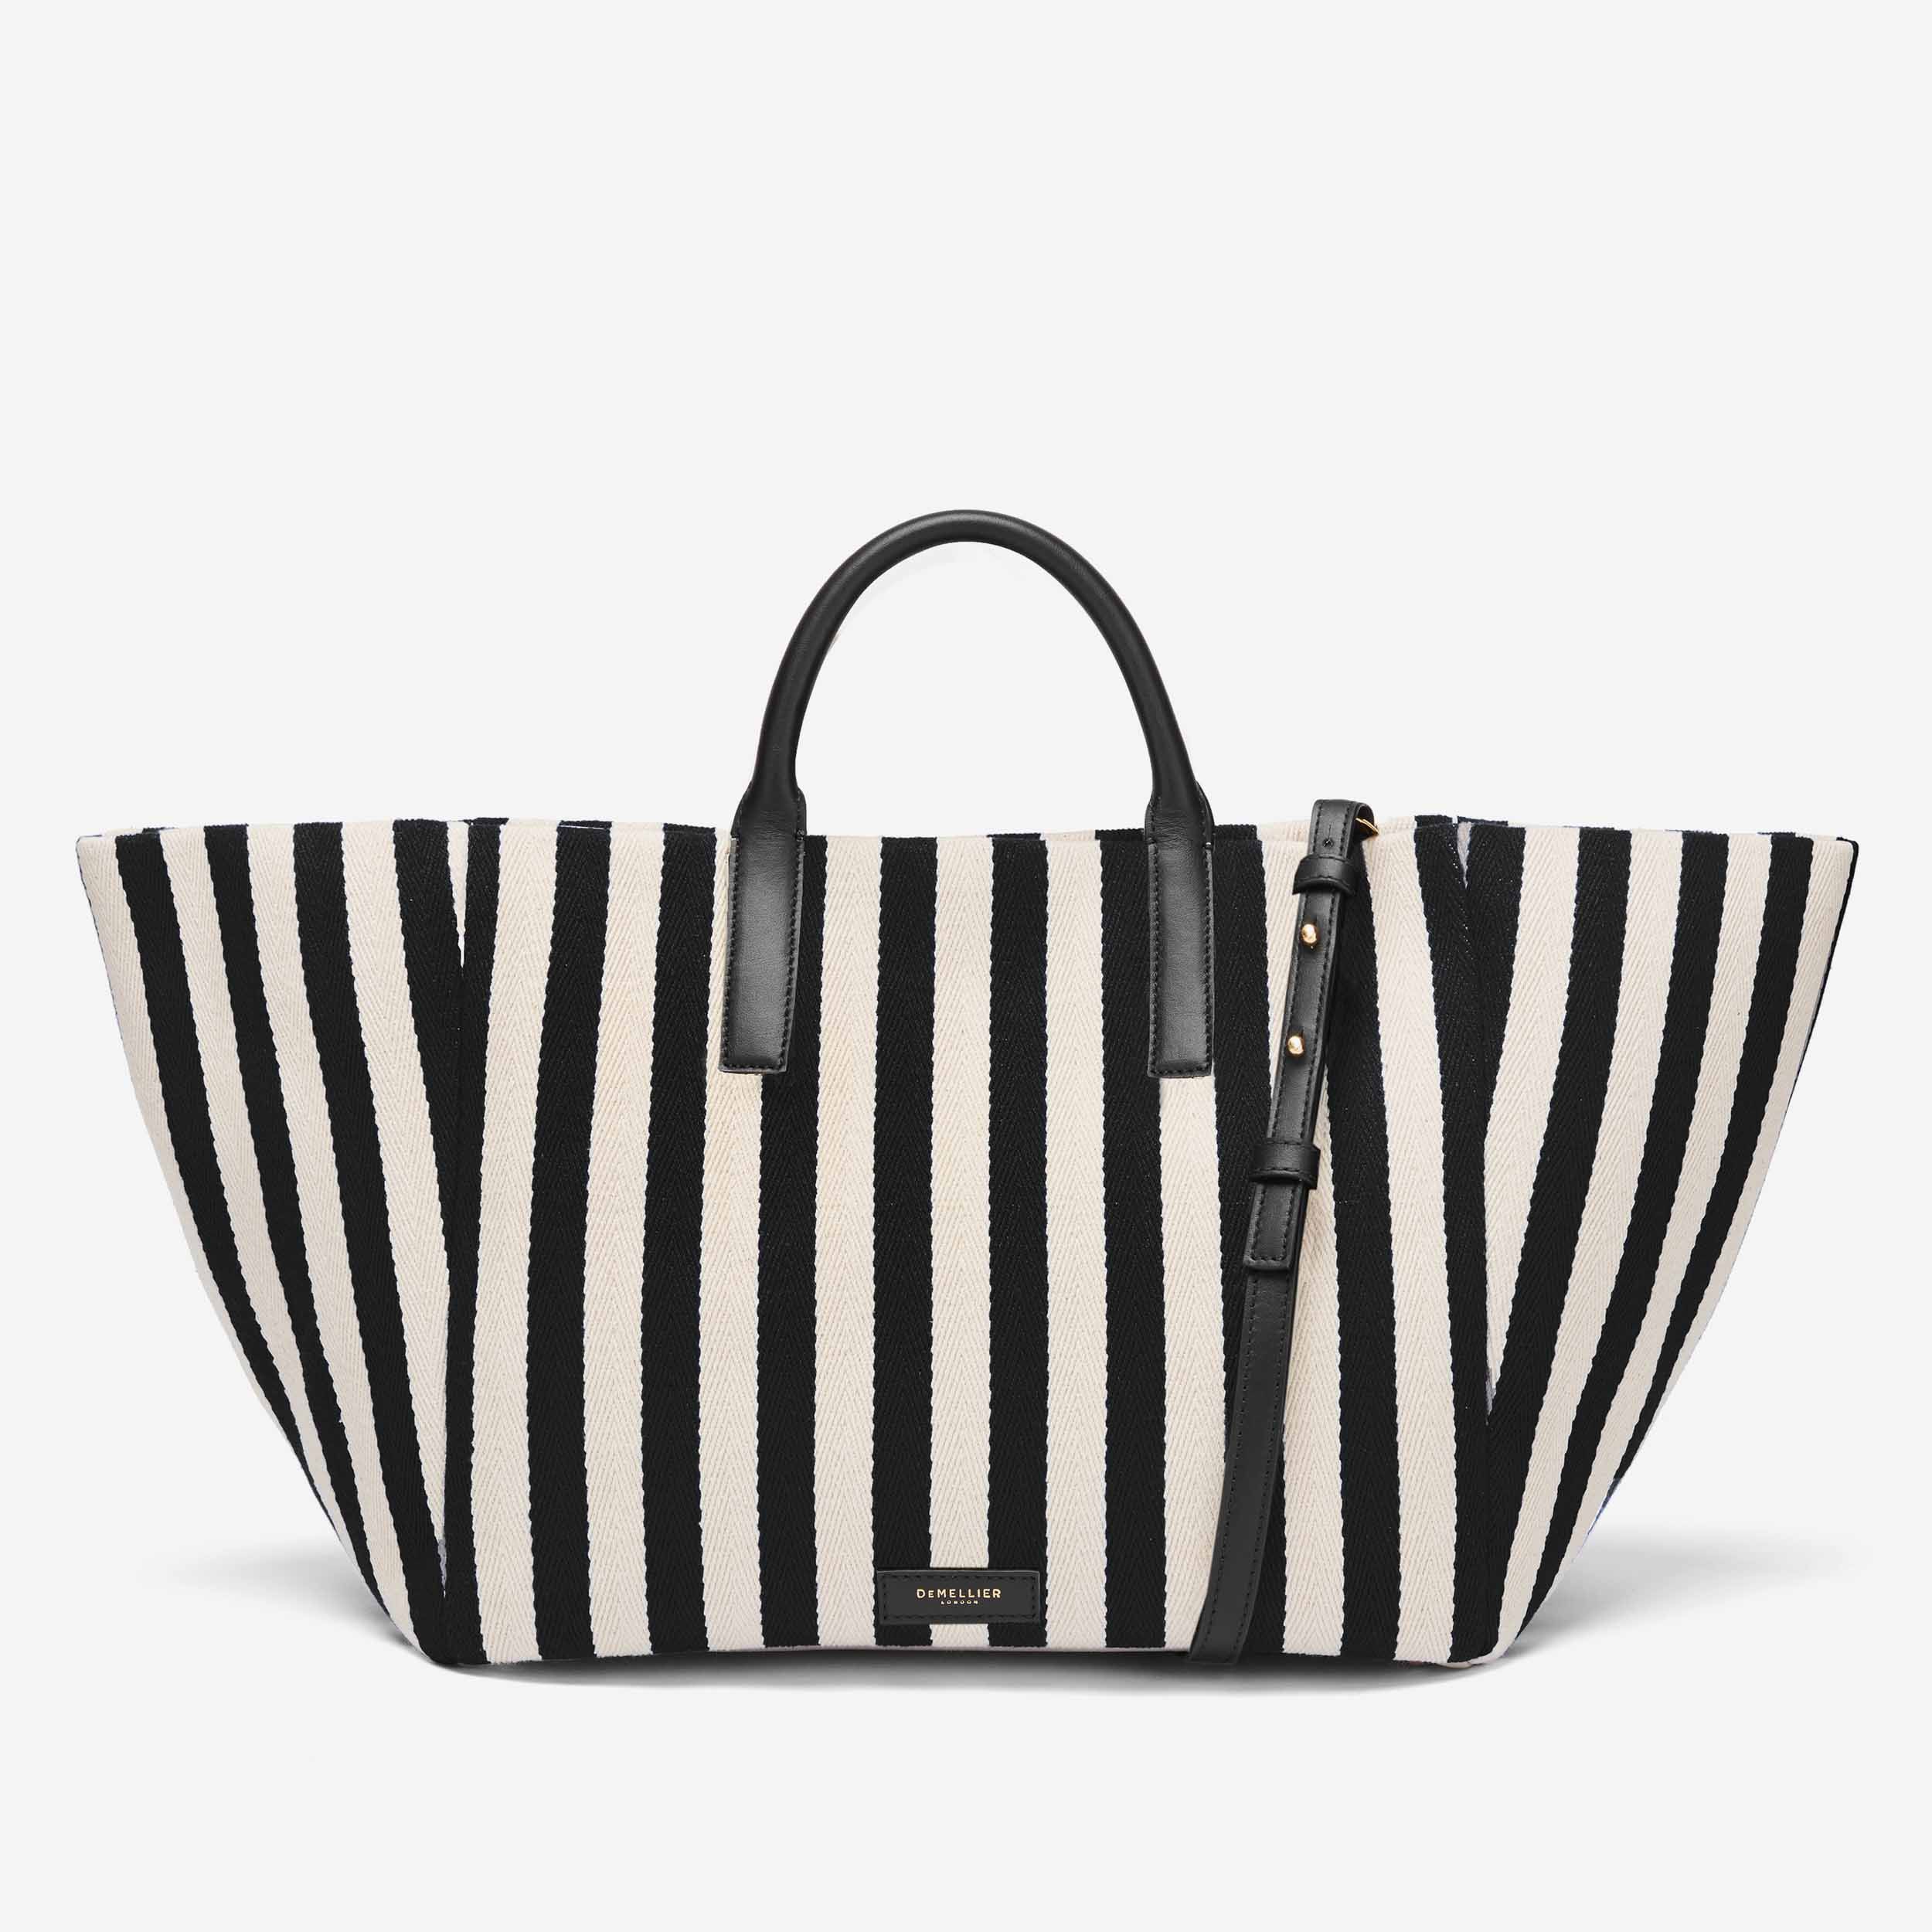 The Lisbon Tote | Black Striped Cotton Canvas Black Smooth | DeMellier | DeMellier